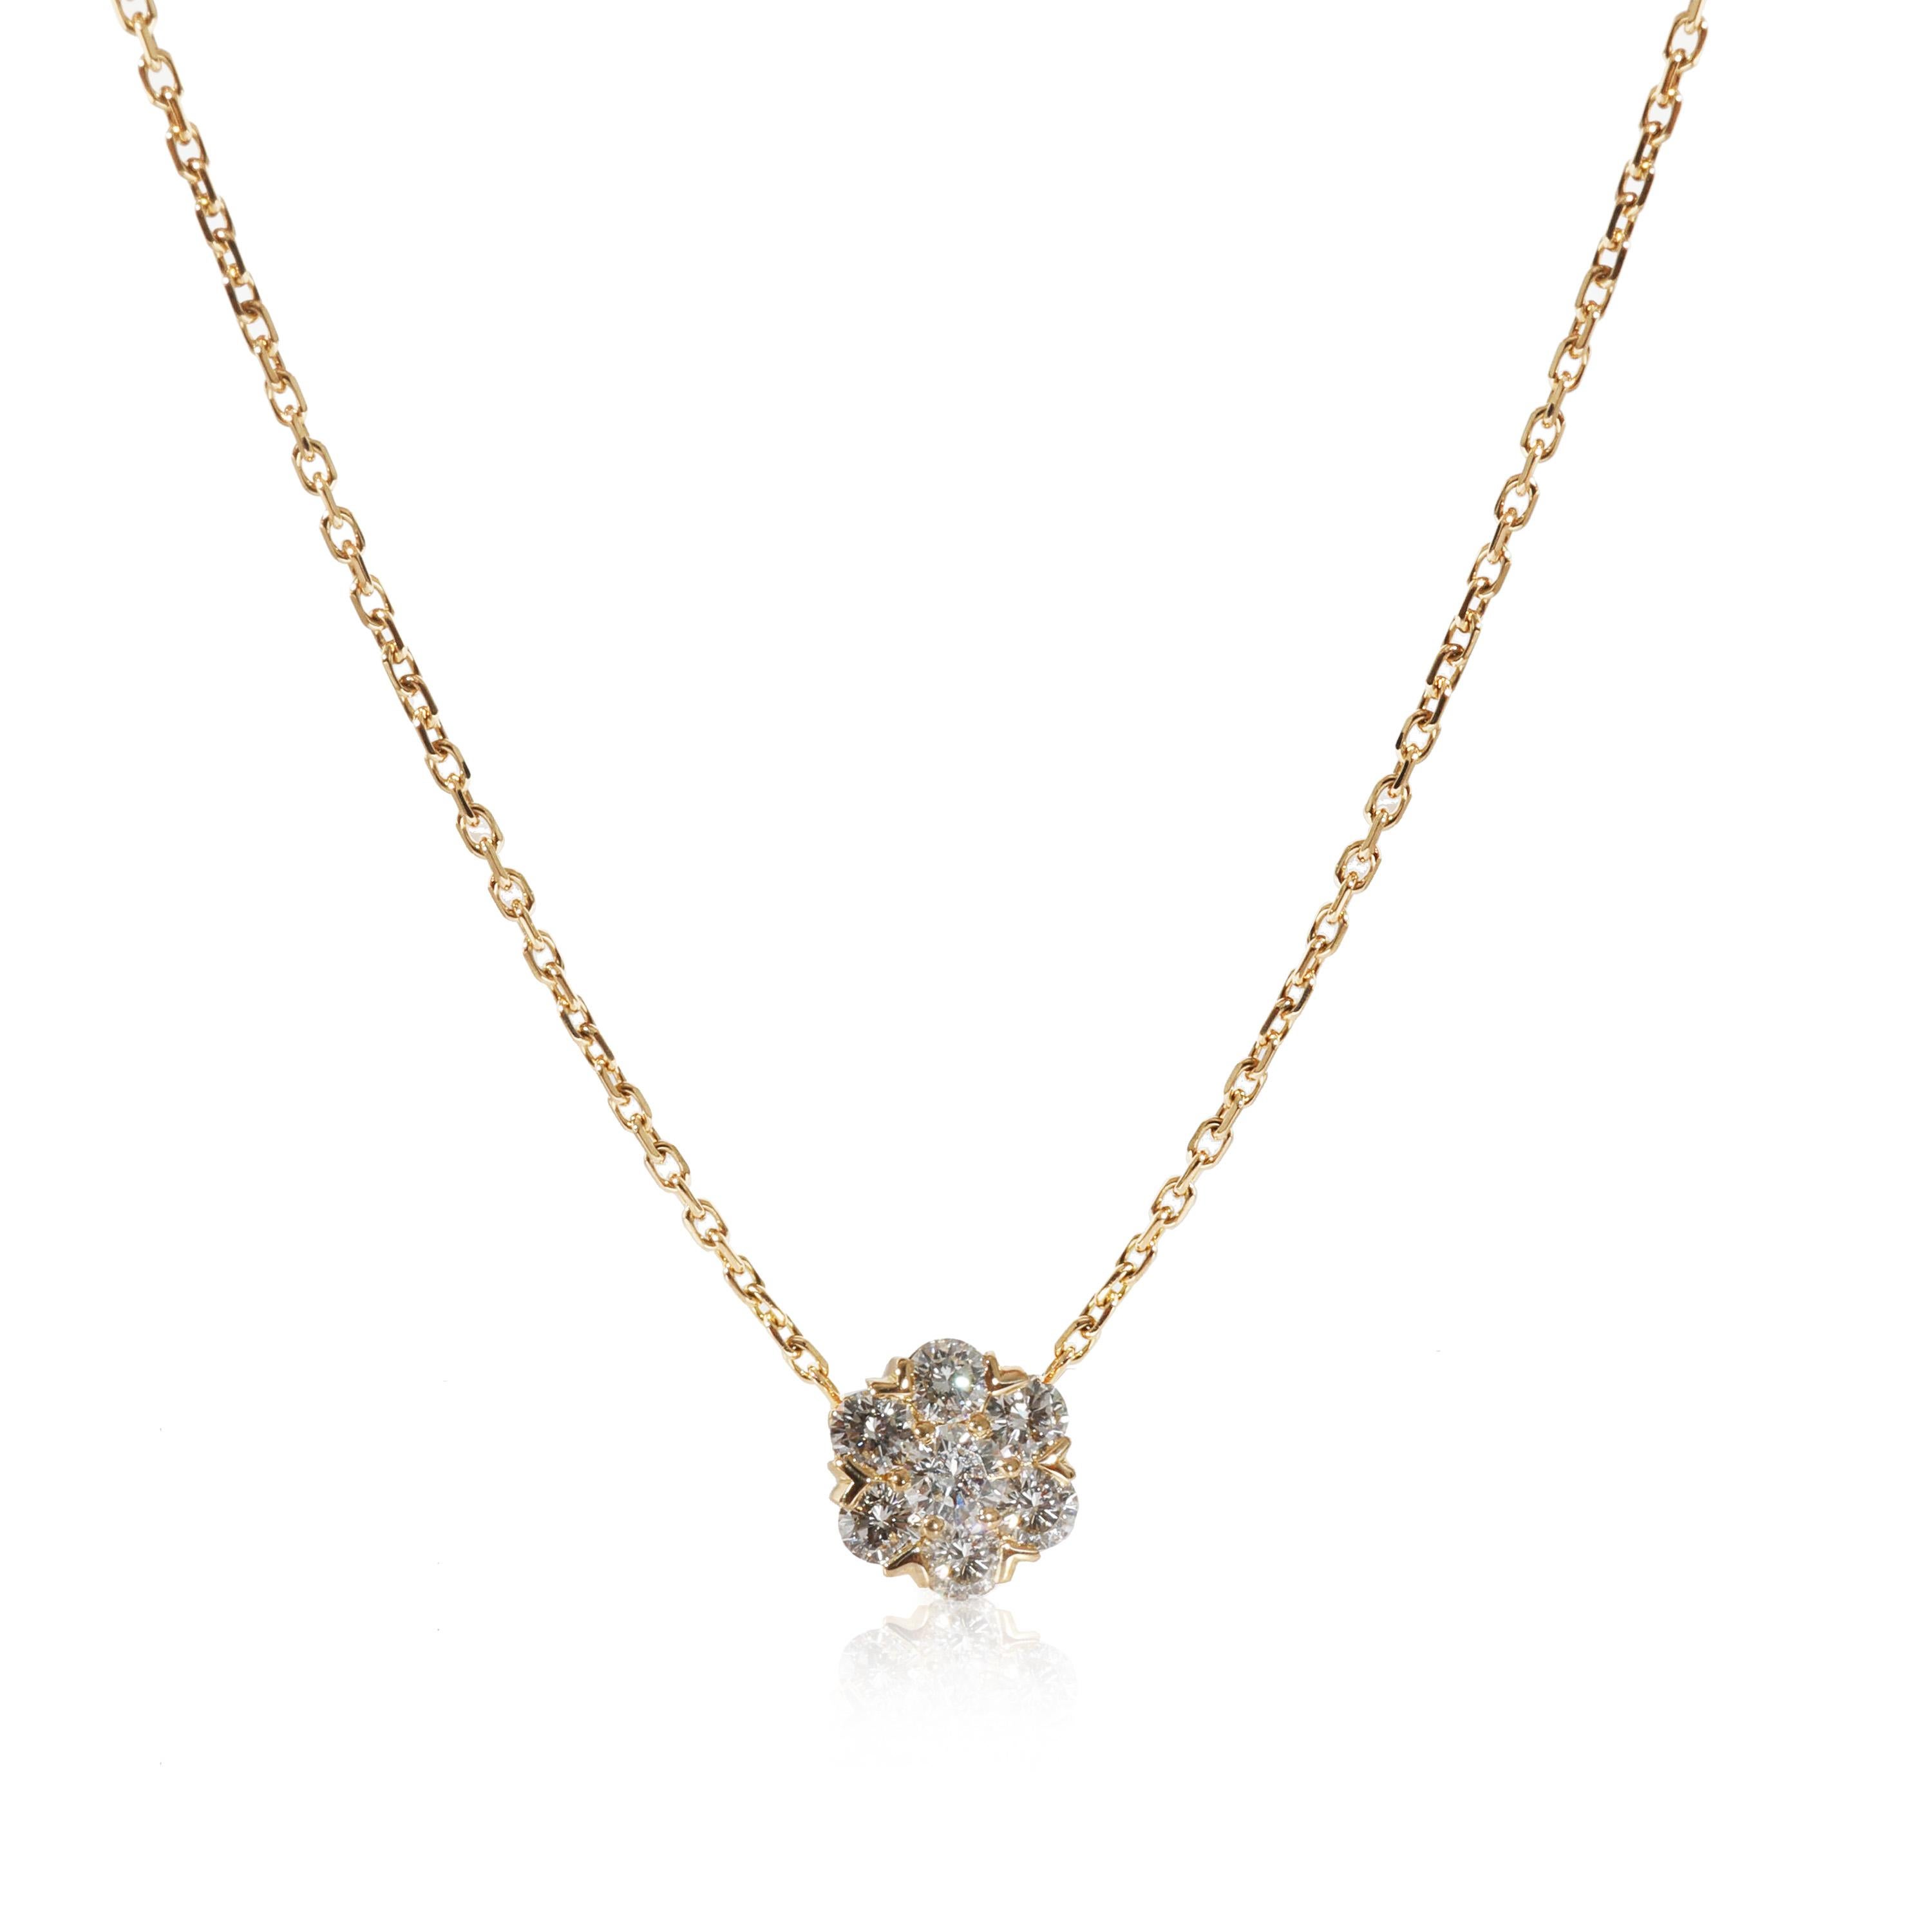 Van Cleef & Arpels Fleurette Pendant in 18k Yellow Gold 0.5 CTW In Excellent Condition For Sale In New York, NY